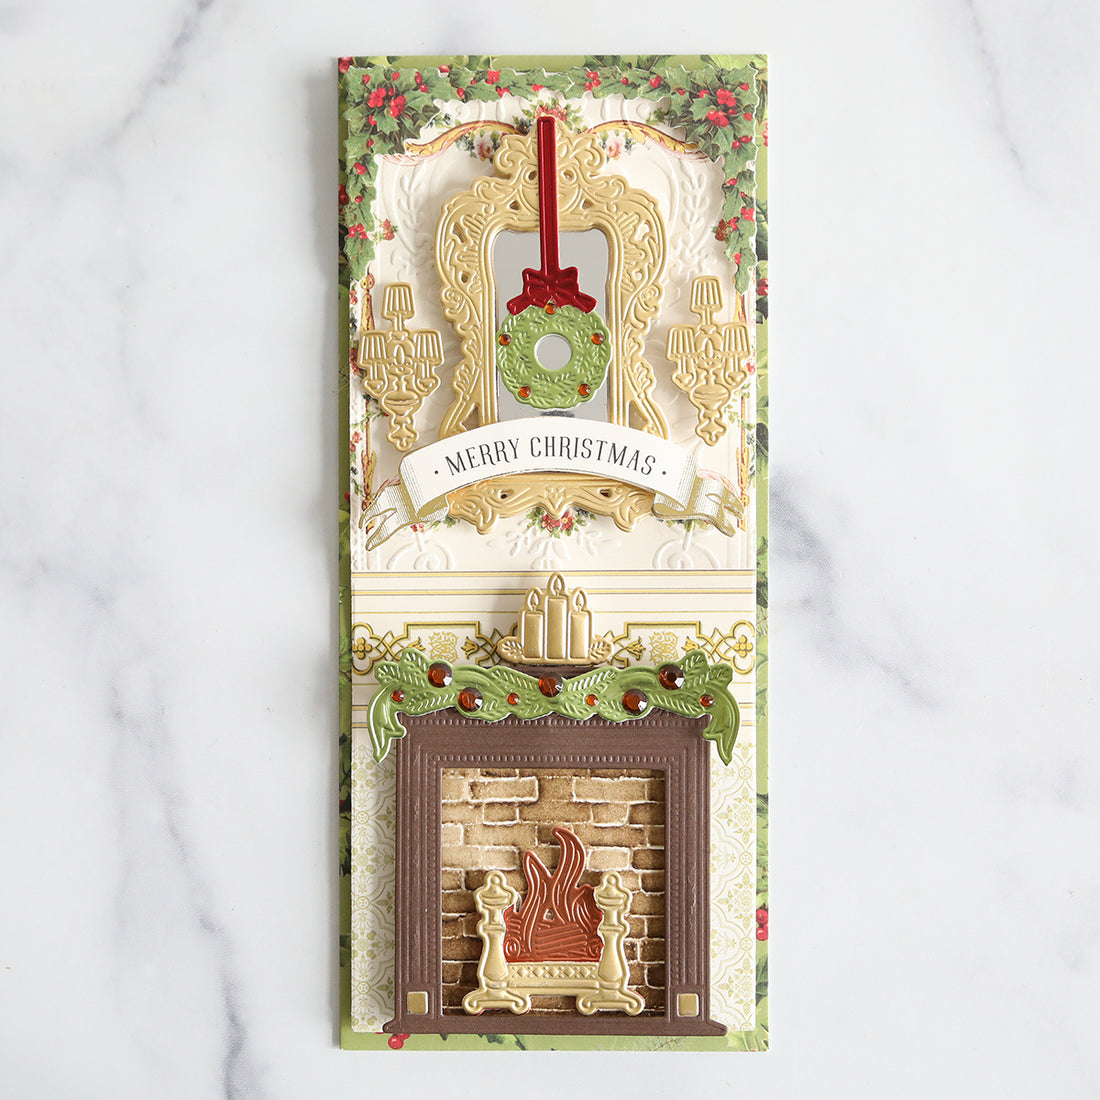 Card made with the Slimline Mantel Dies. Brick hearth, gold mirror and festive details